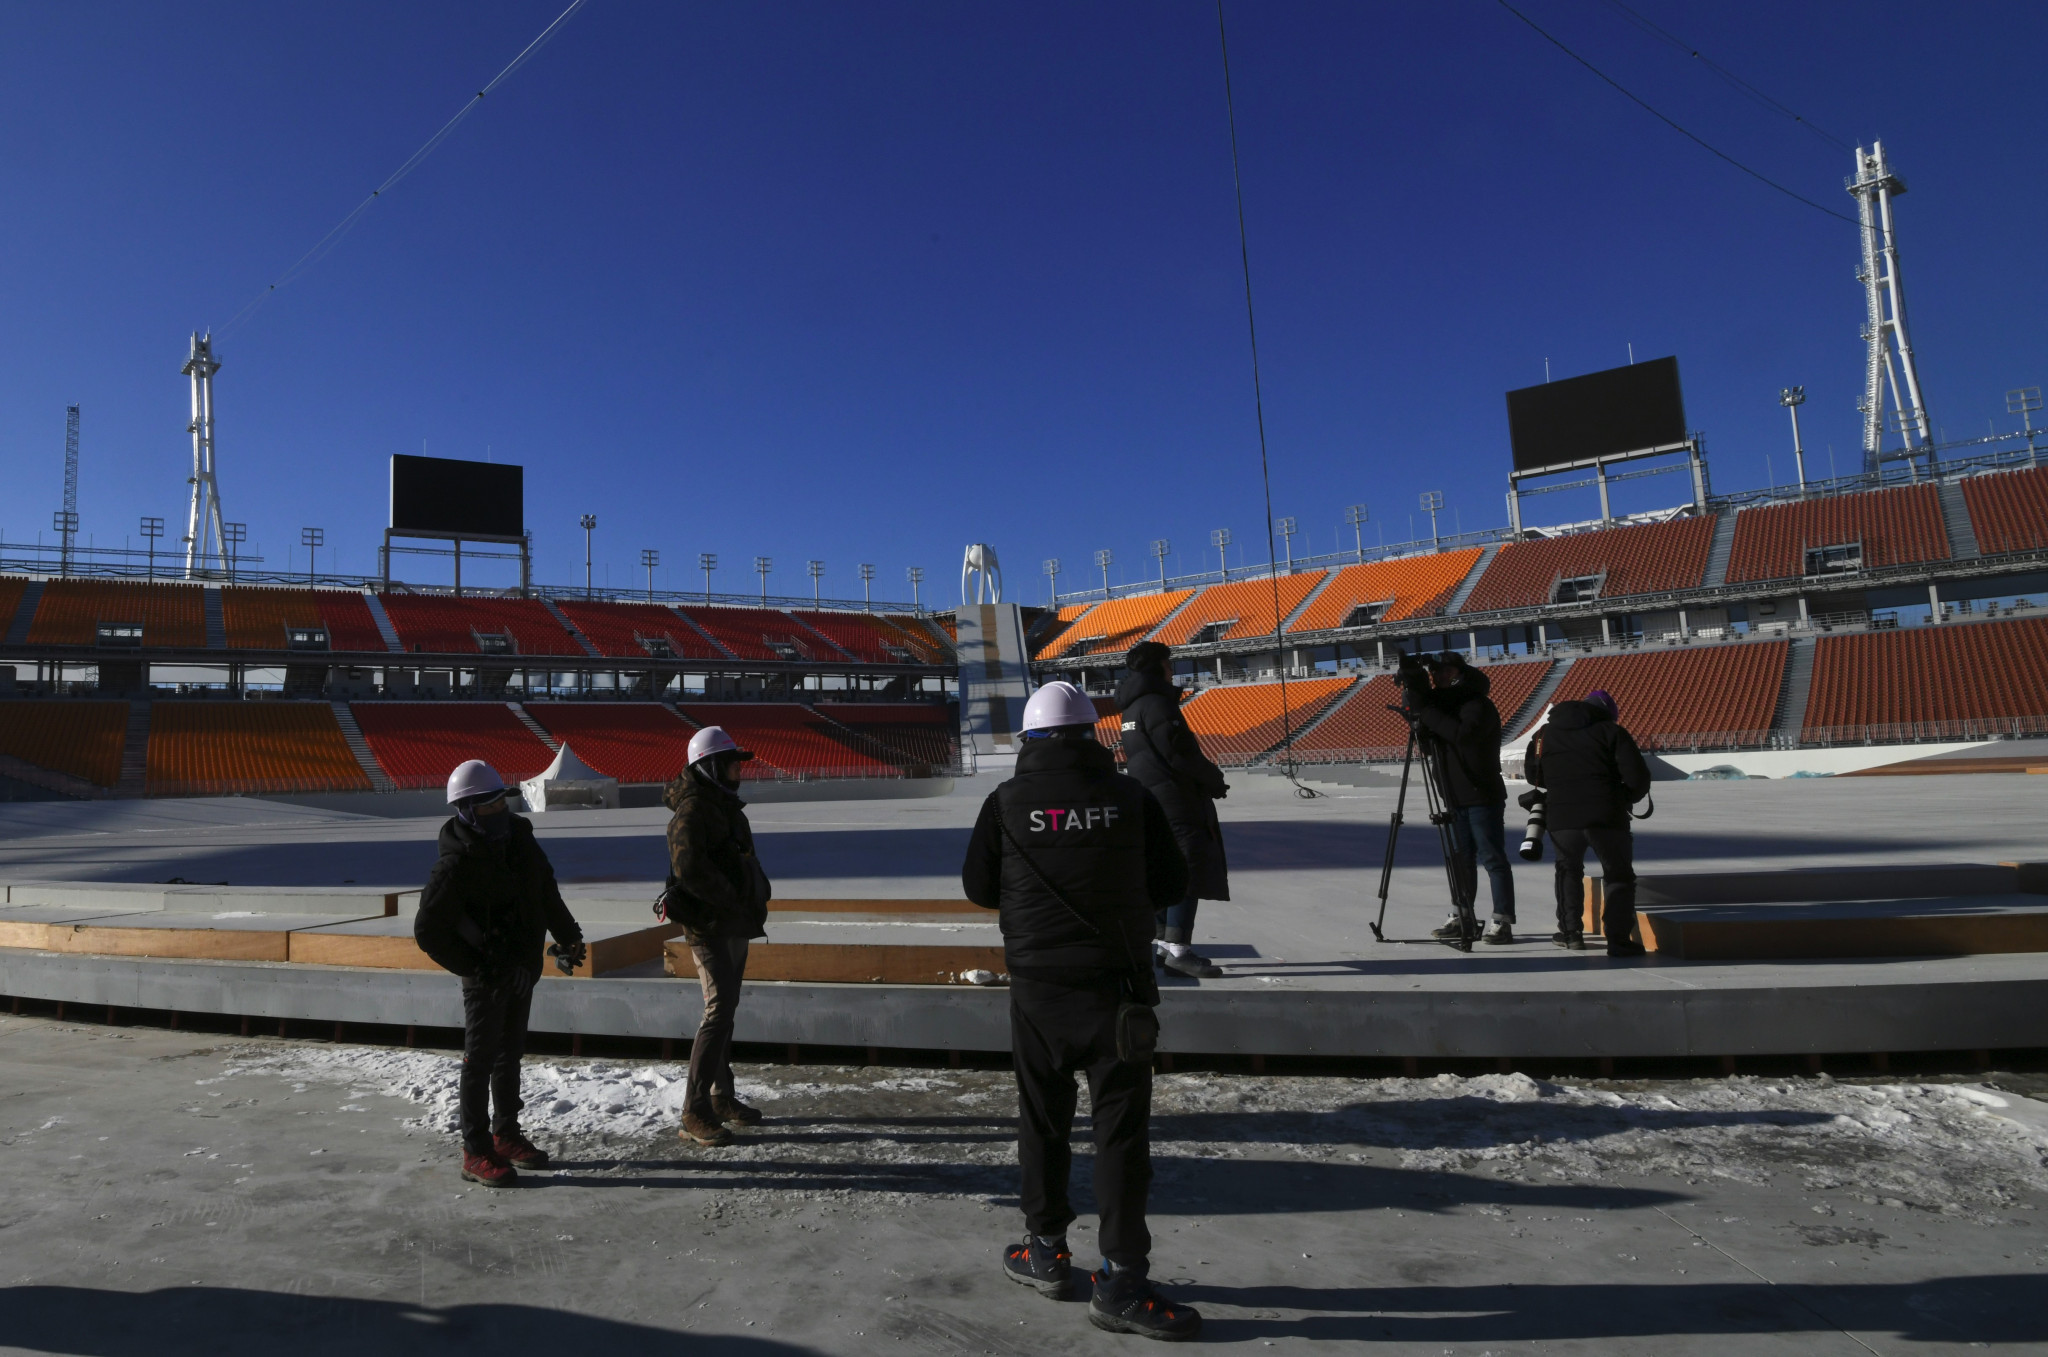 Concerns have been raised about cold temperature at the Pyeongchang 2018 Opening Ceremony and at other events ©Getty Images